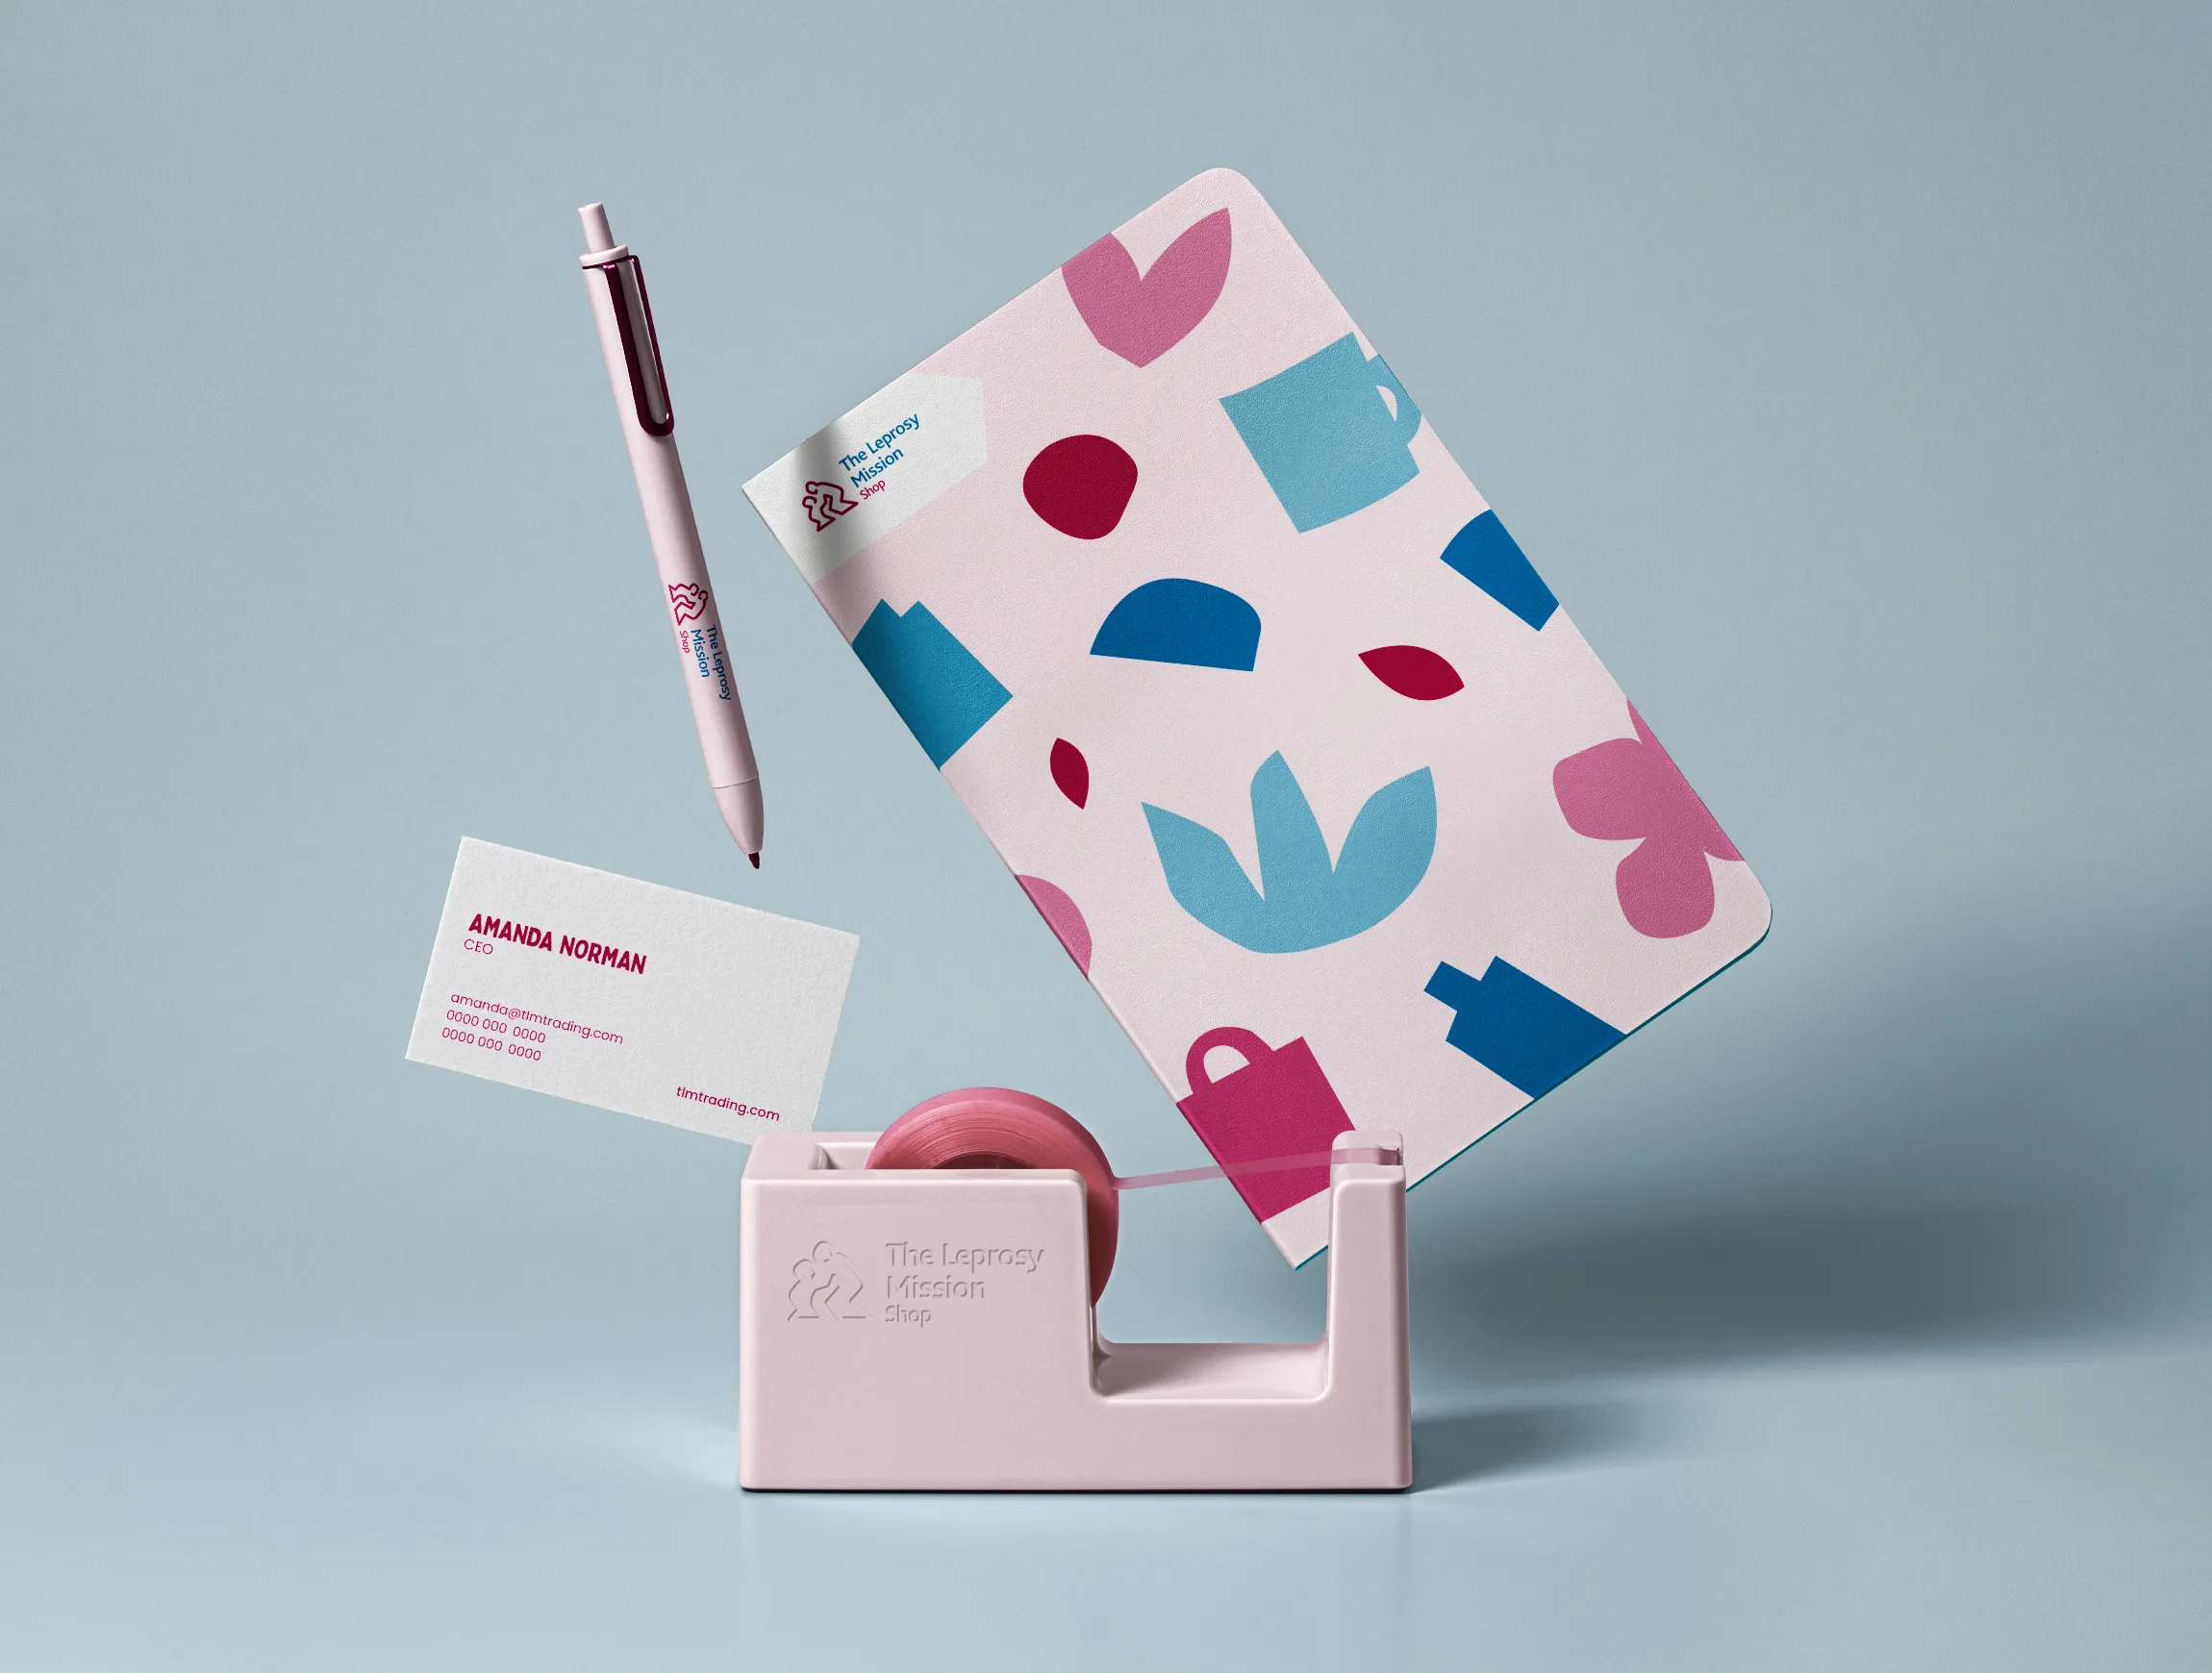 Leprosy Mission Shop branding on stationery items and business cards